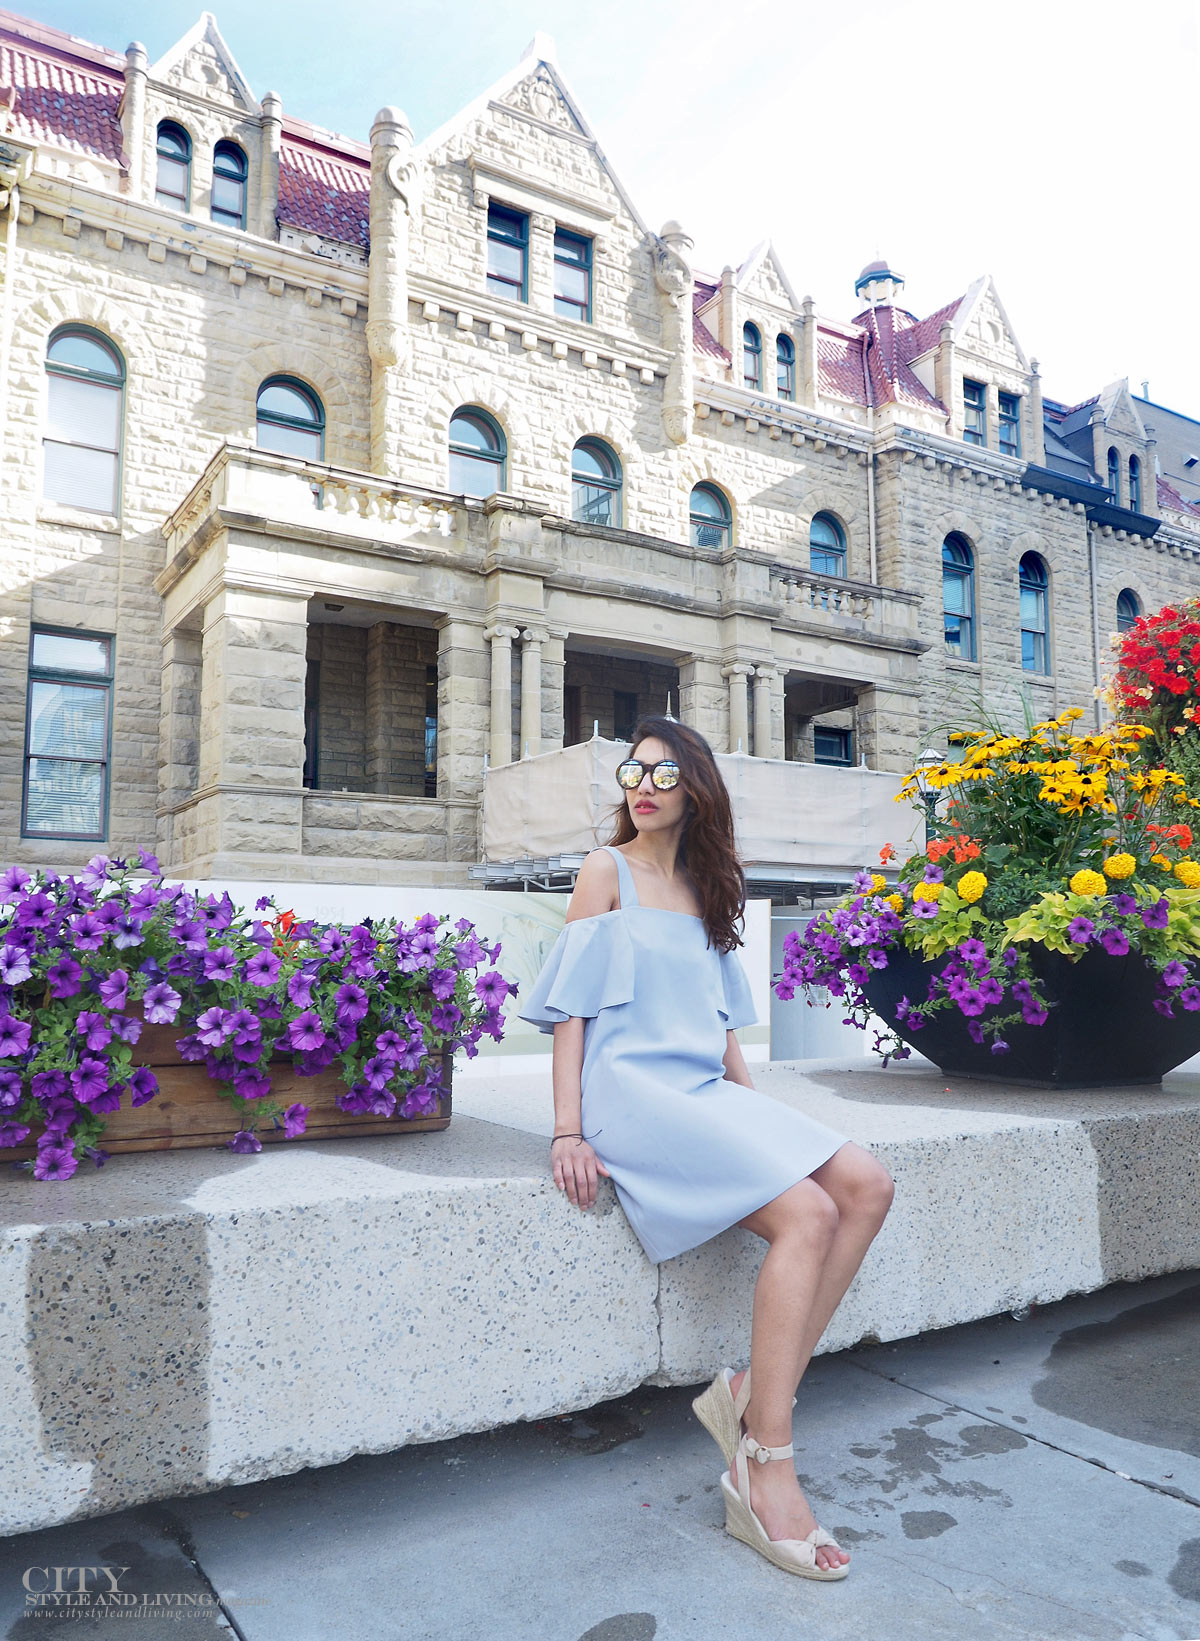 City STyle and Living The Editors Notebook style blogger Downtown Calgary colourful flowers blooming during summer wearing an off shoulder topshop dress and wedges